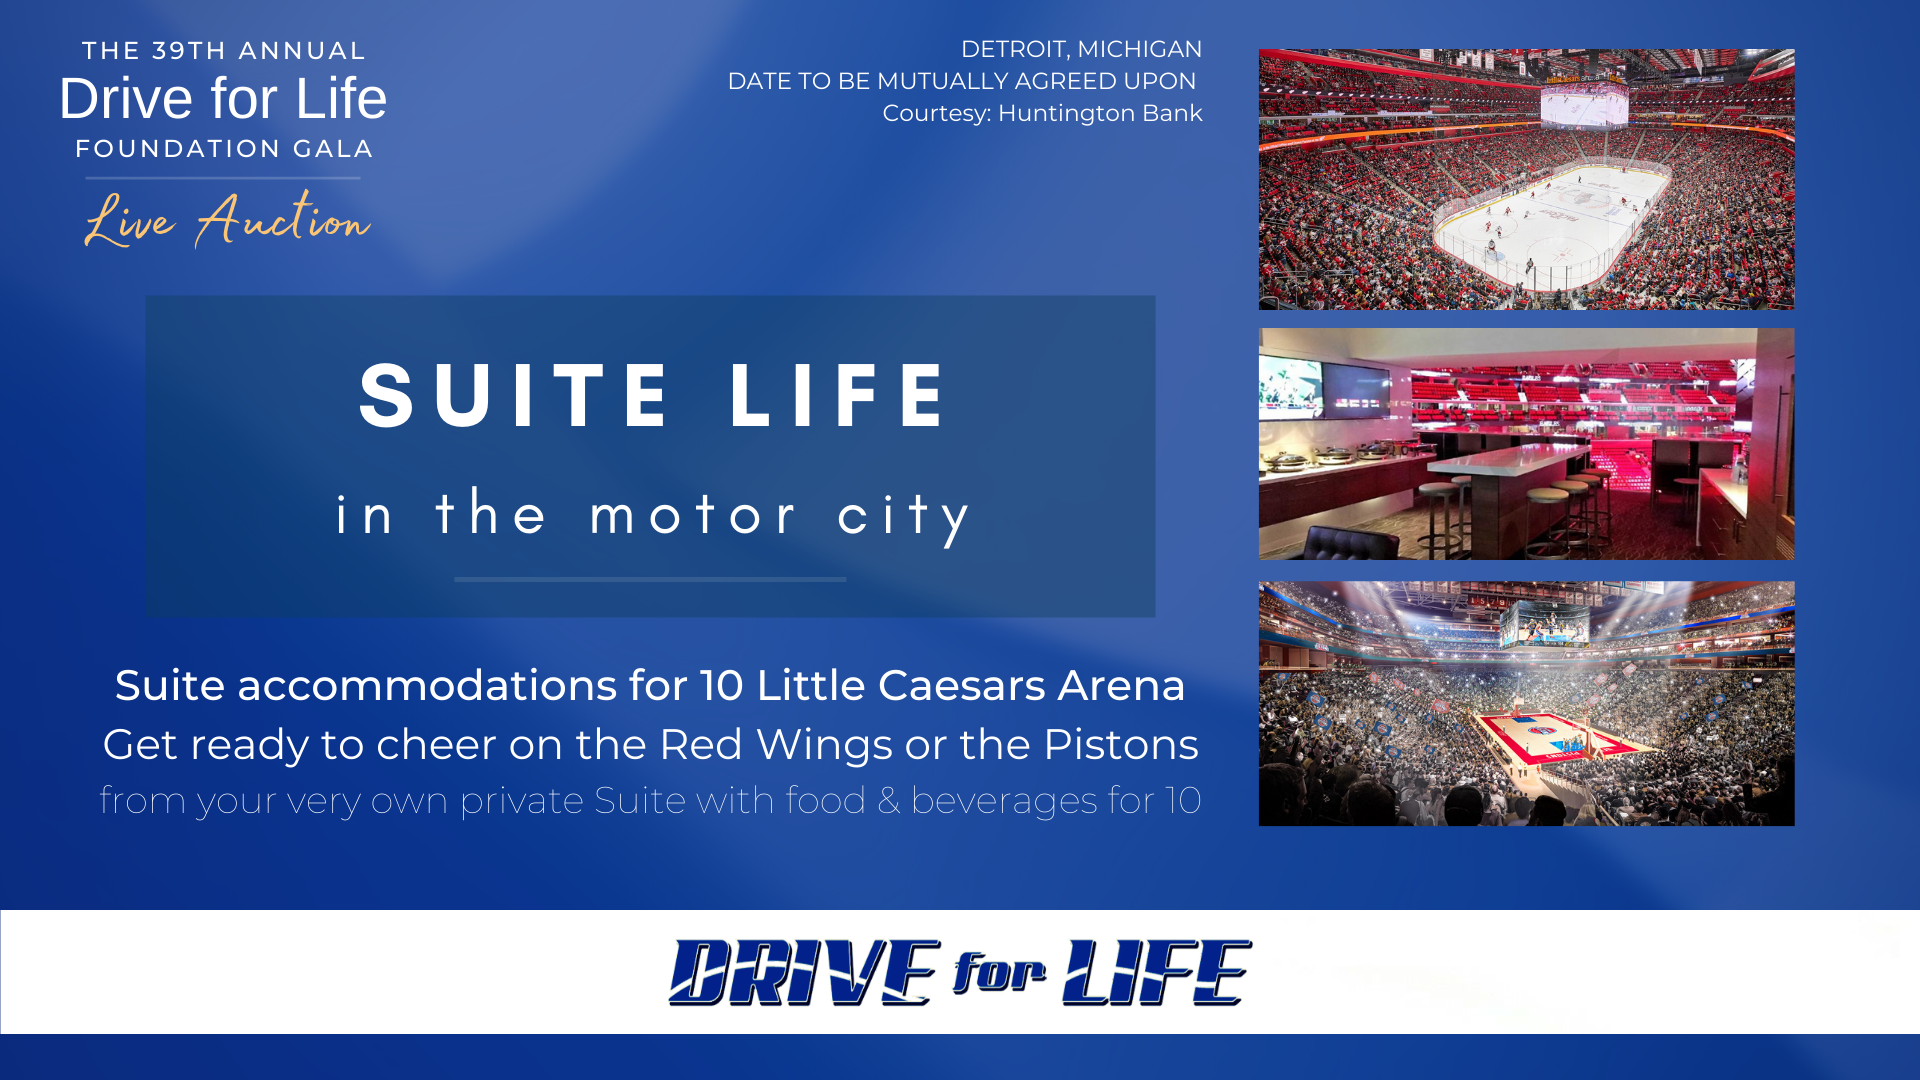 LIVE AUCTION EXPERIENCE: Suite Life in the Motor City - Available at the 39th Annual Drive for Life Foundation Monday, September 13, 2021 at 6:30 p.m. at the Radisson Plaza Hotel